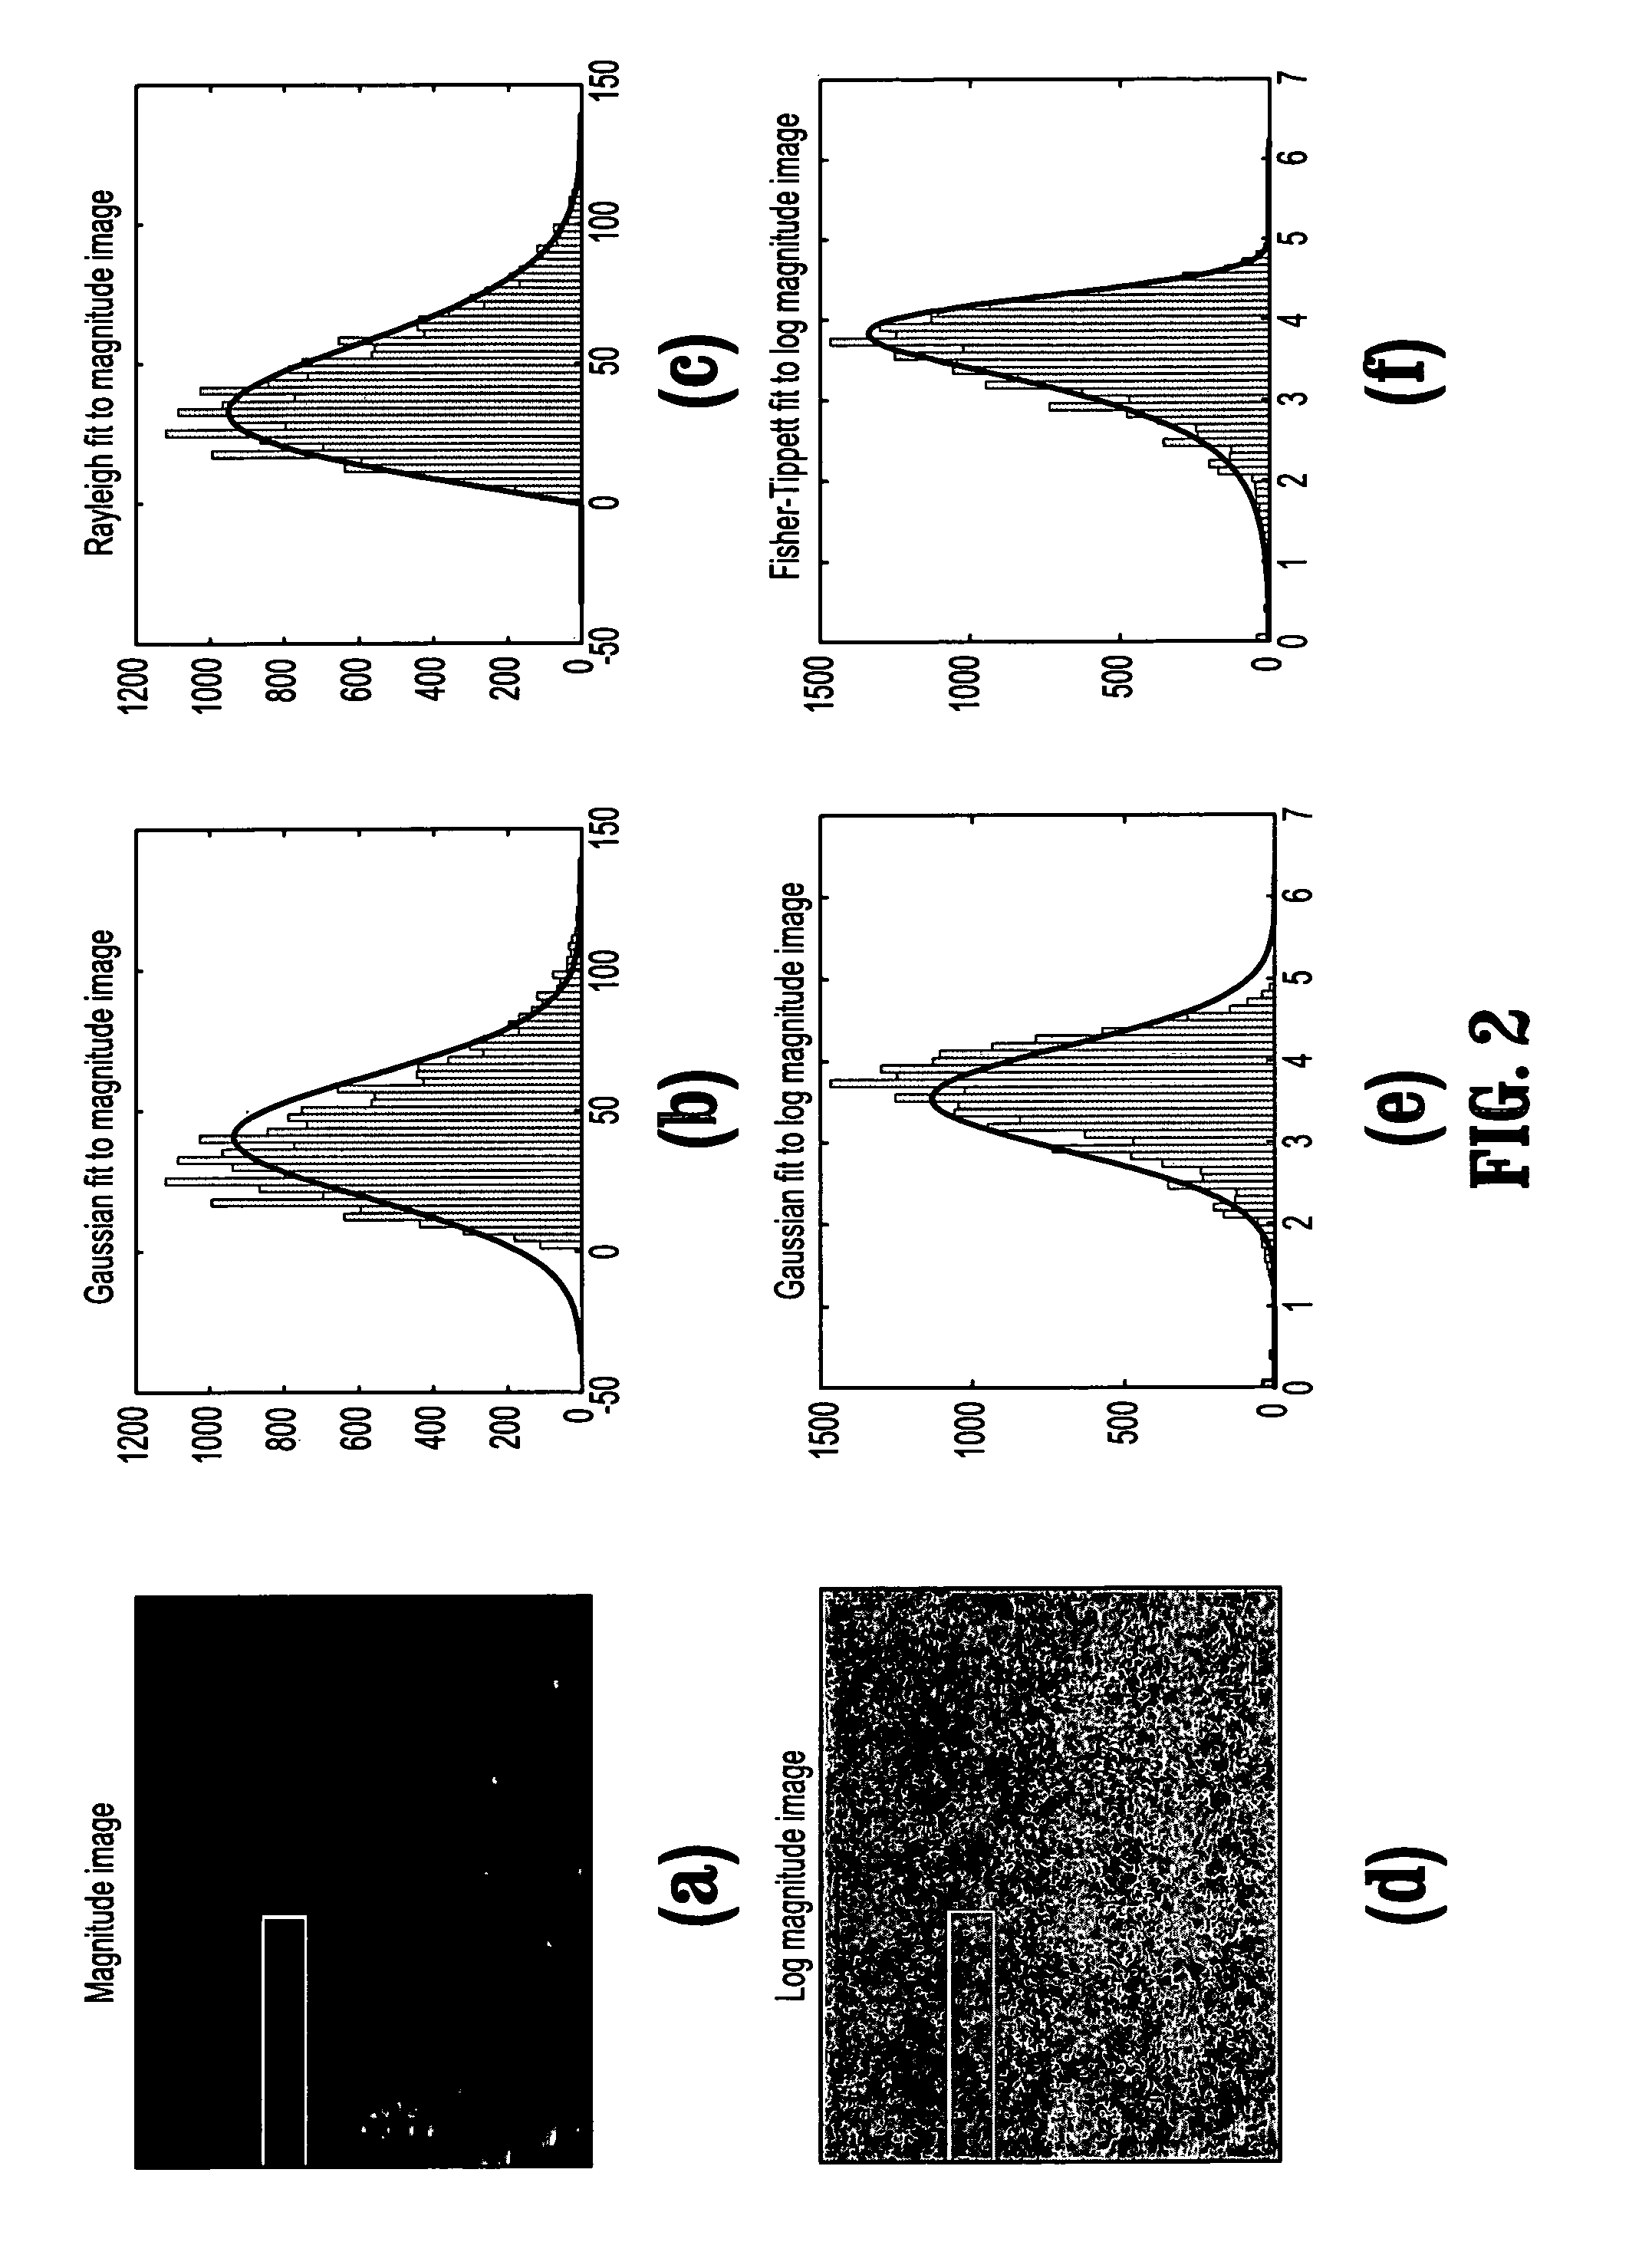 System and method for ultrasound specific segmentation using speckle distributions